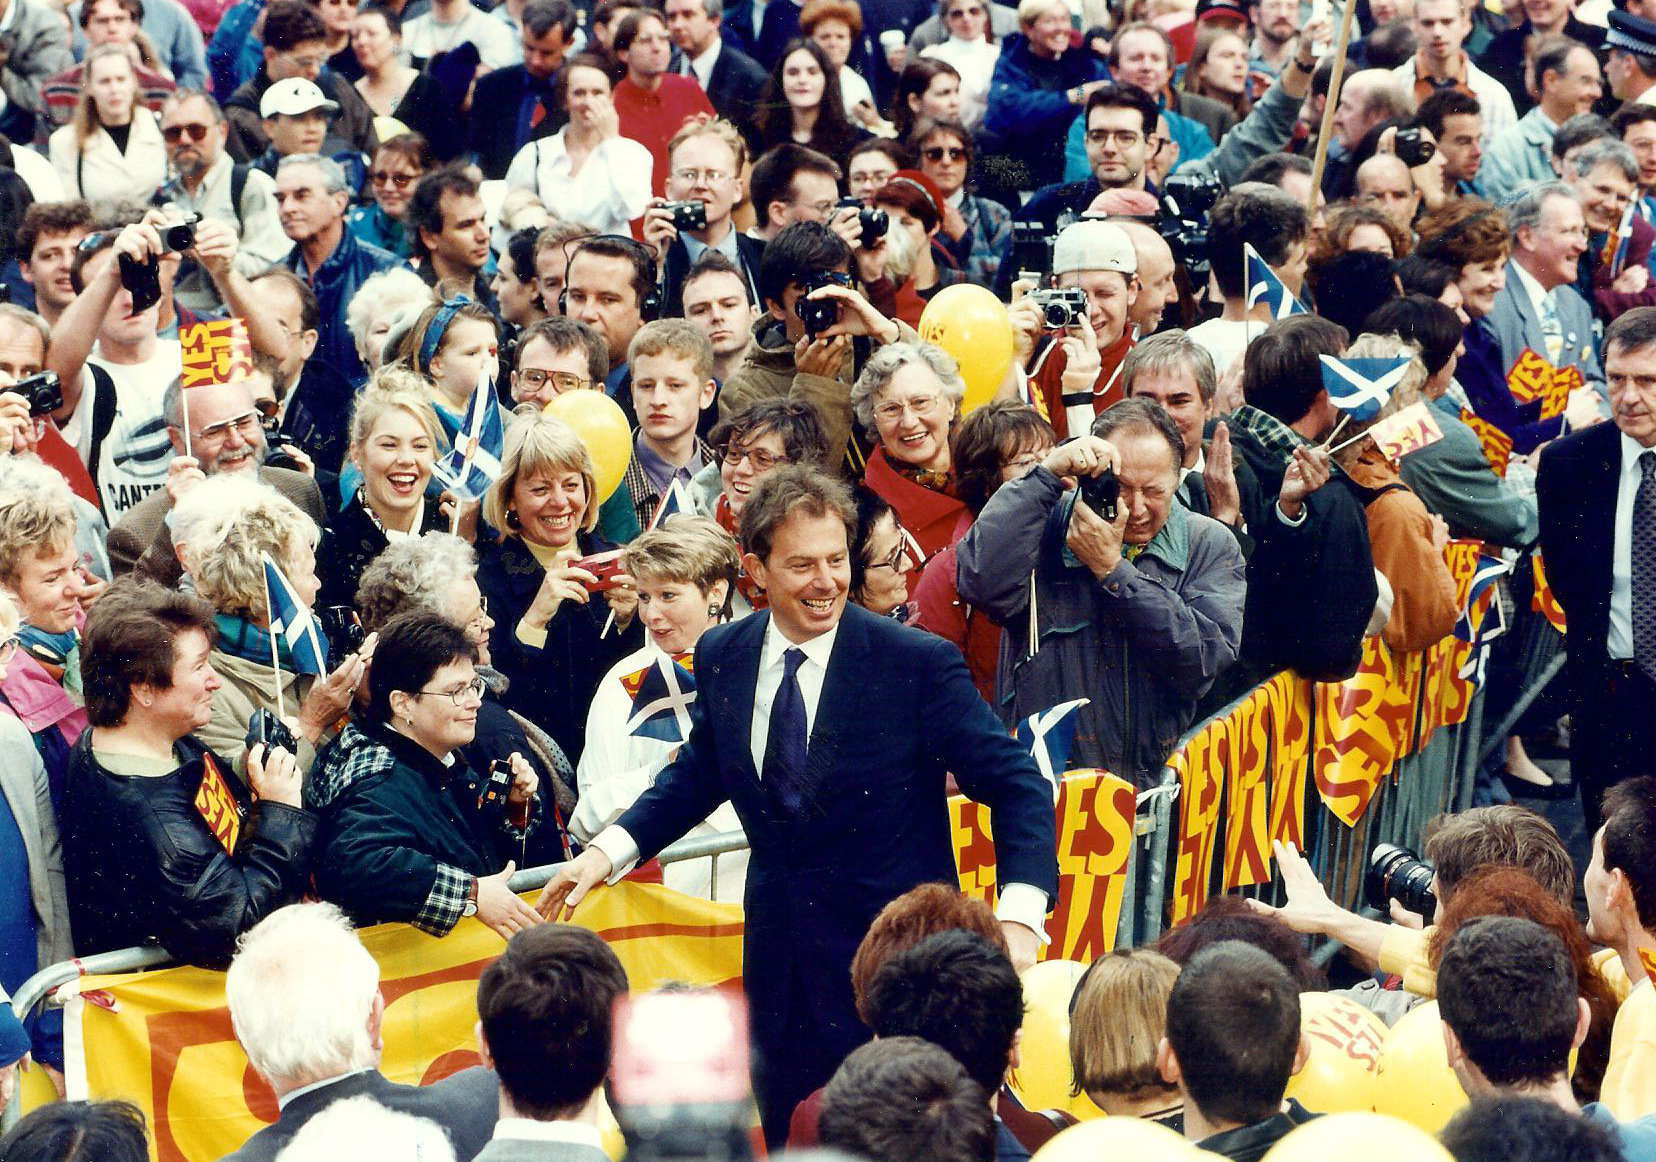 Prime minister Tony Blair walkabout in Edinburgh, 12th September 1997, the day after the Scottish Devolution referendum. Photograph by Gordon terris 